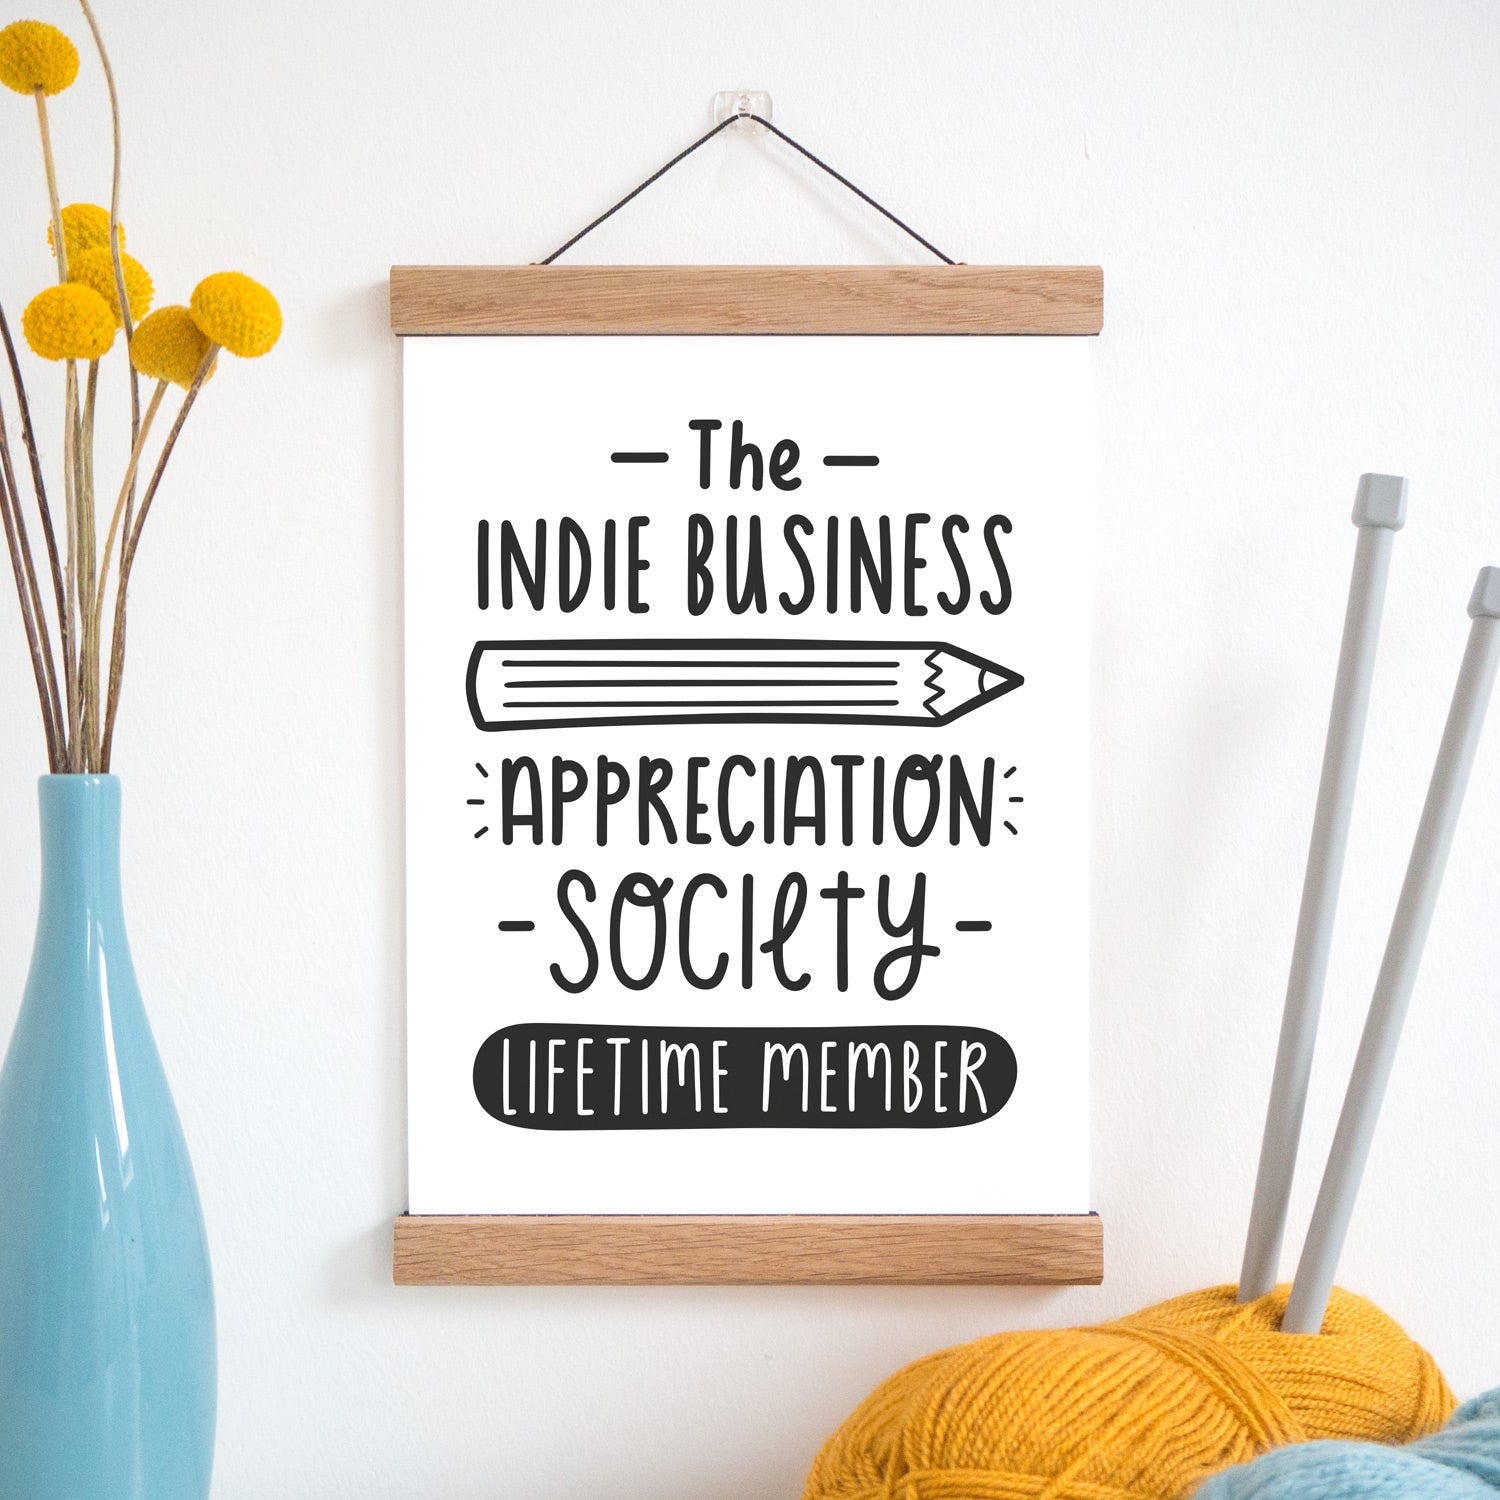 The indie business appreciation society print in black and white and held in a magnetic frame next to a vase of yellow flowers and wool with knitting needles.